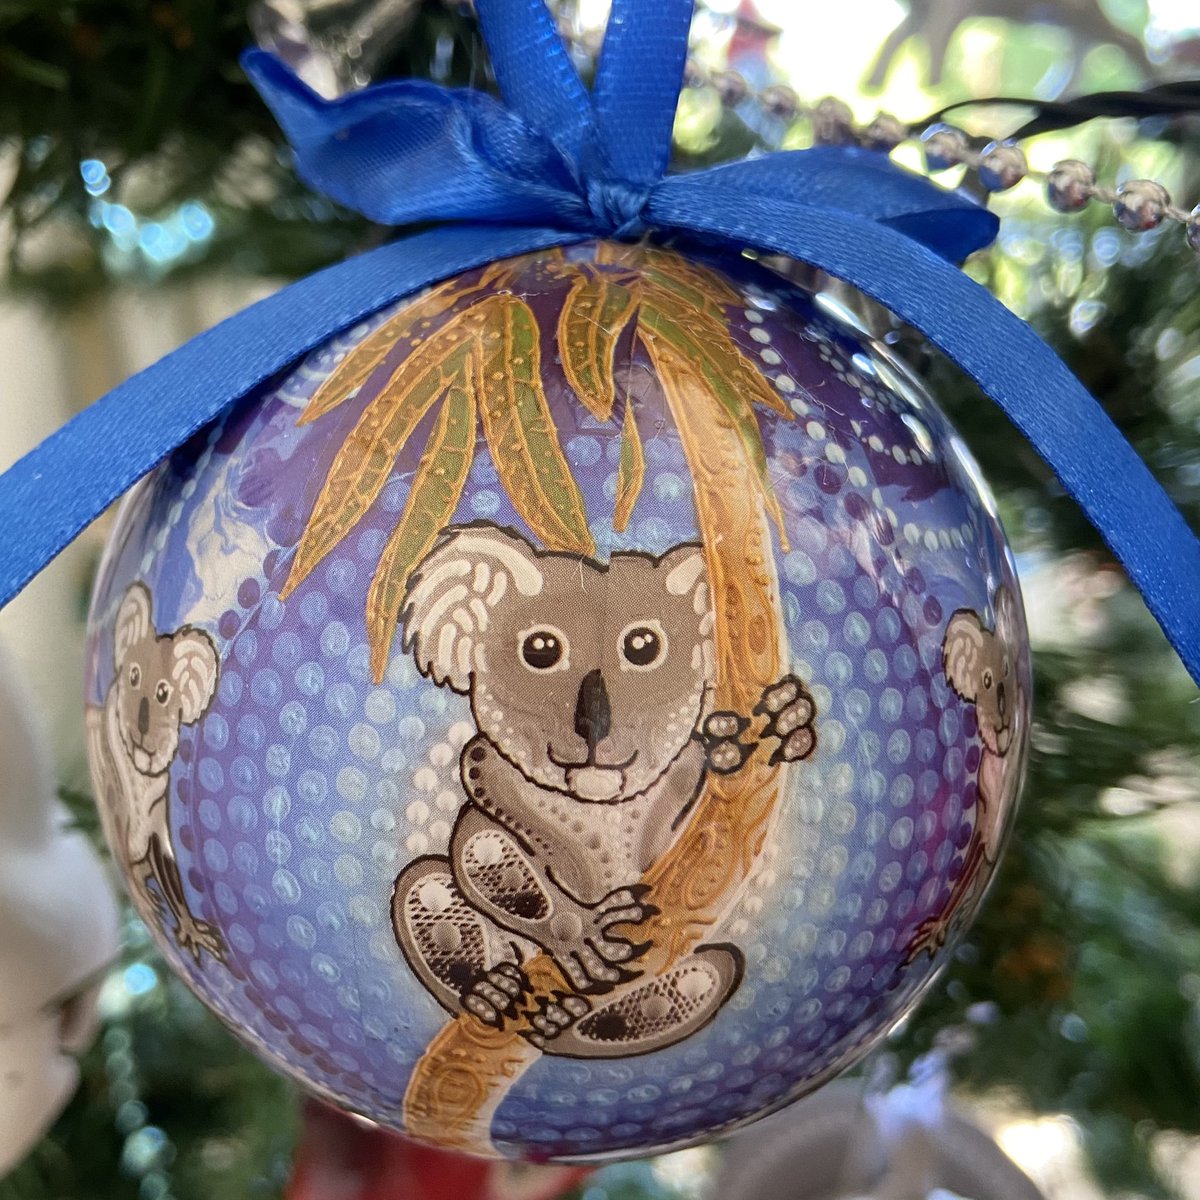 Here’s an Aussie-themed one. It’s a koala designed by a local Indigenous artist named  @CherneeSutton 